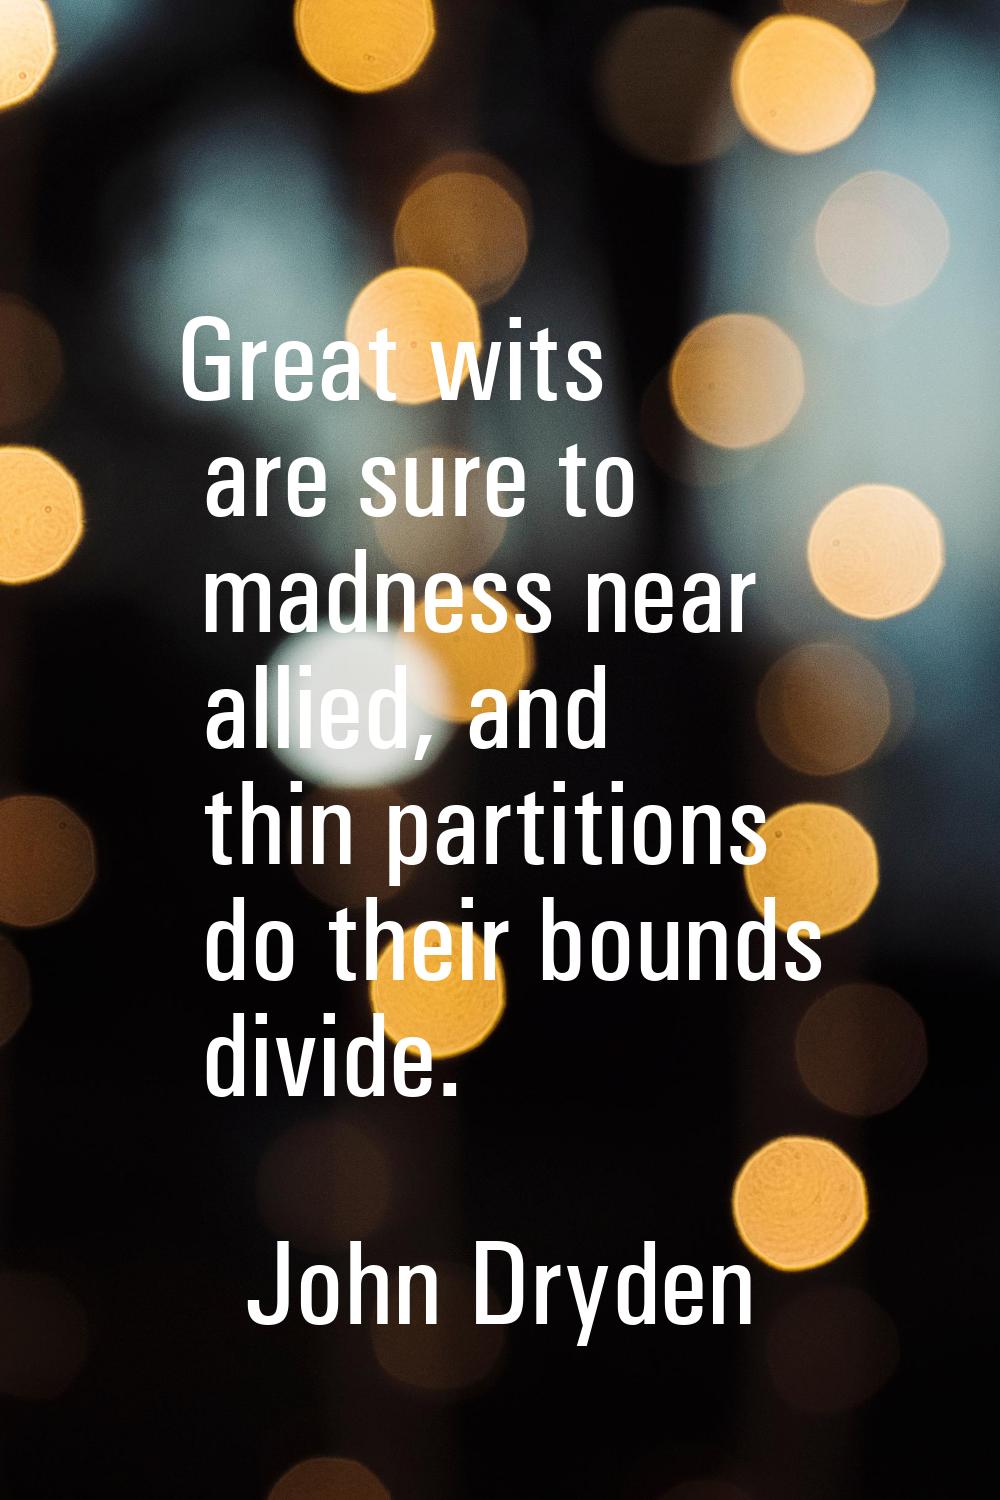 Great wits are sure to madness near allied, and thin partitions do their bounds divide.